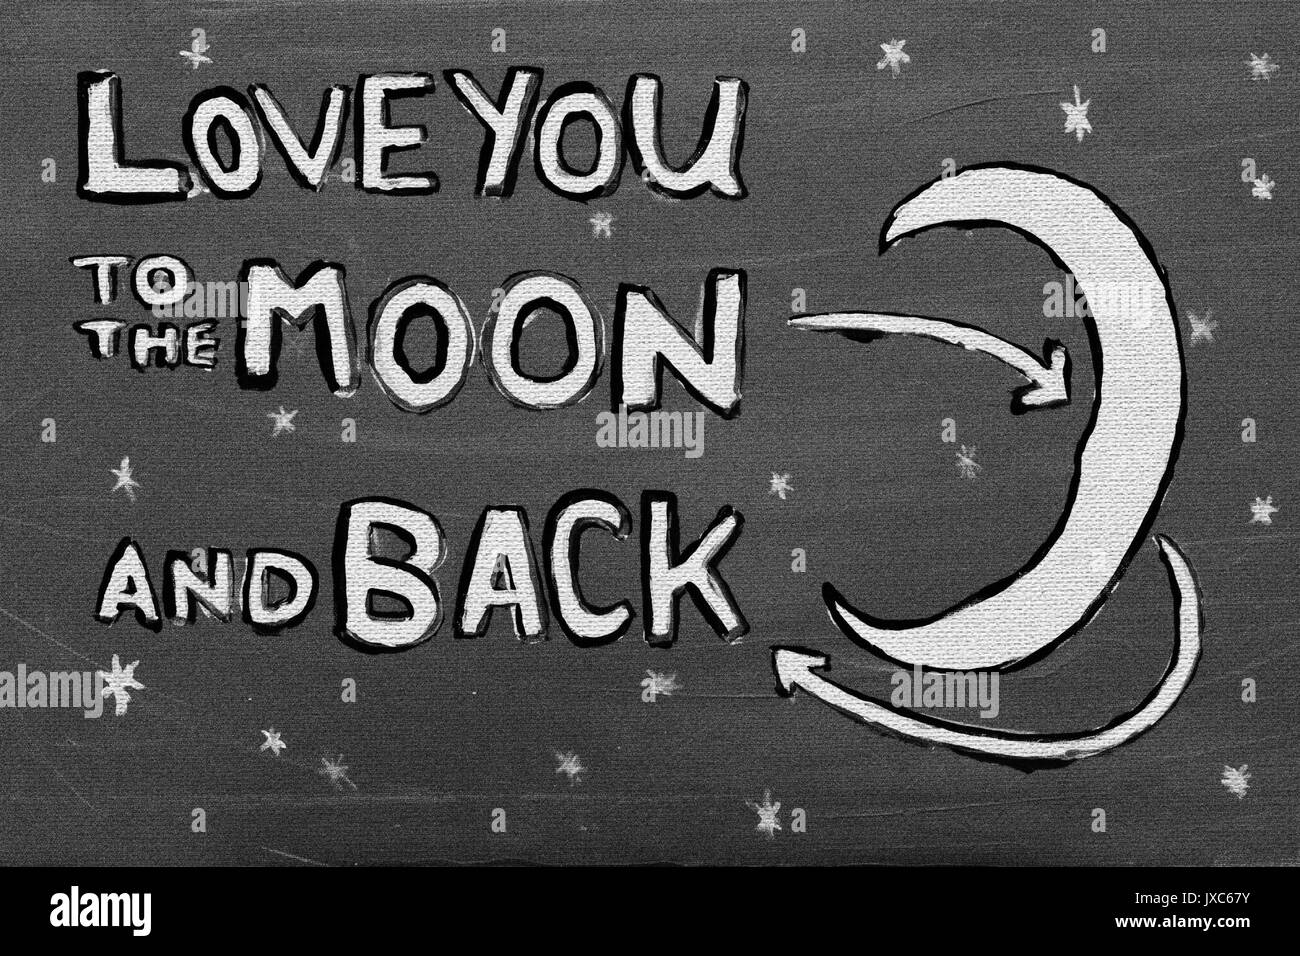 Love You To The Moon And Back Painting On Canvas Stock Photo Alamy